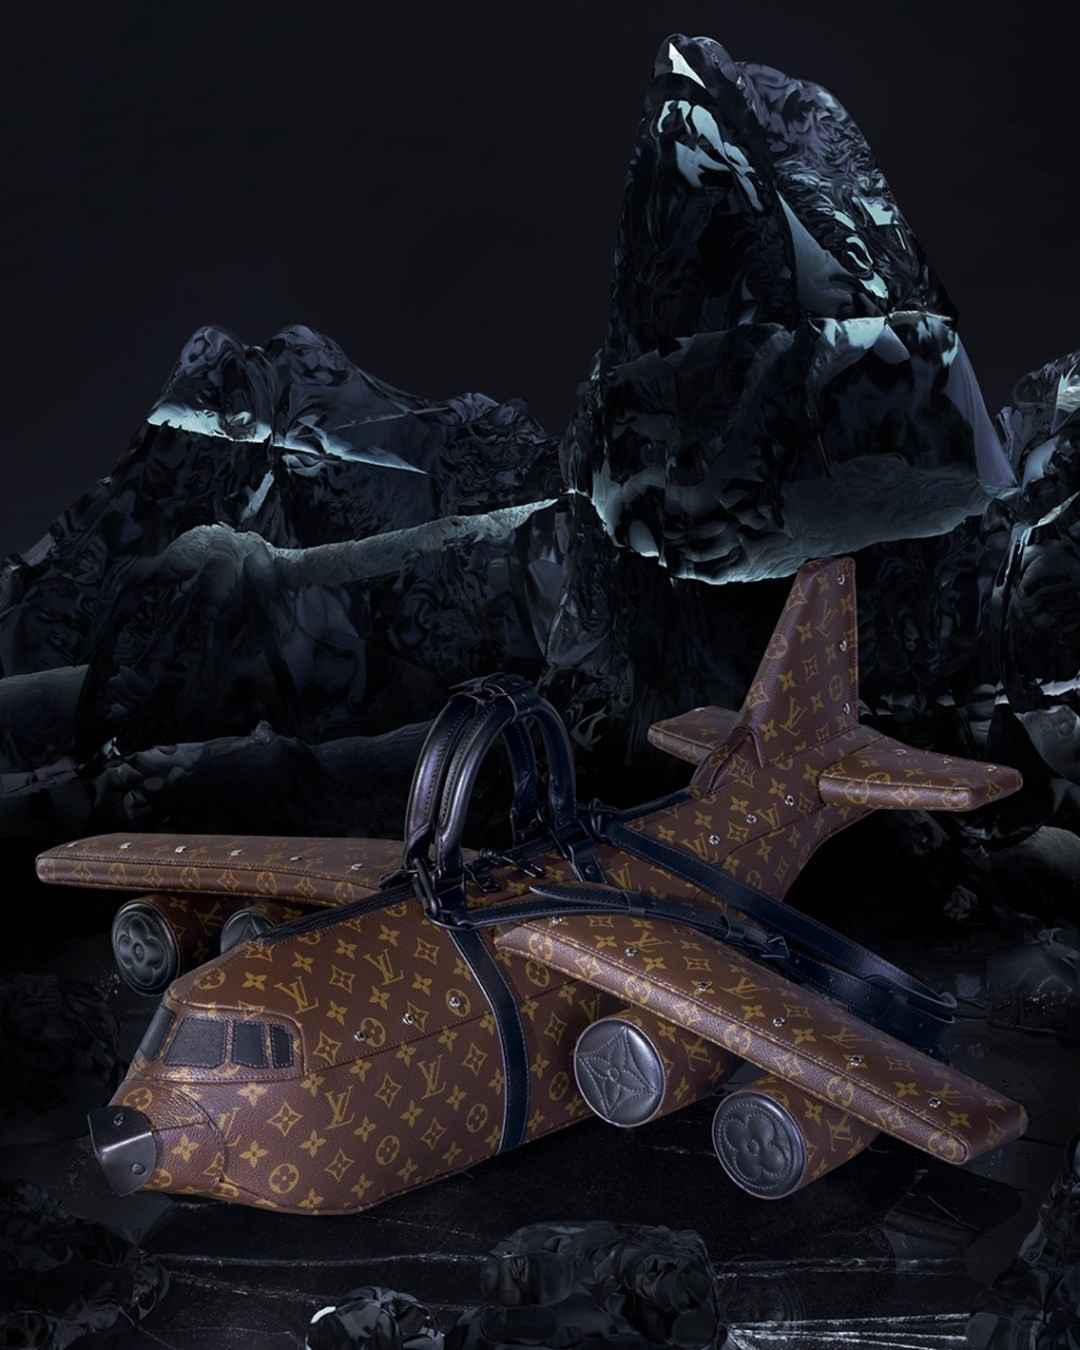 Louis Vuitton Airplane Shaped Bag Costs More Than Some Actual